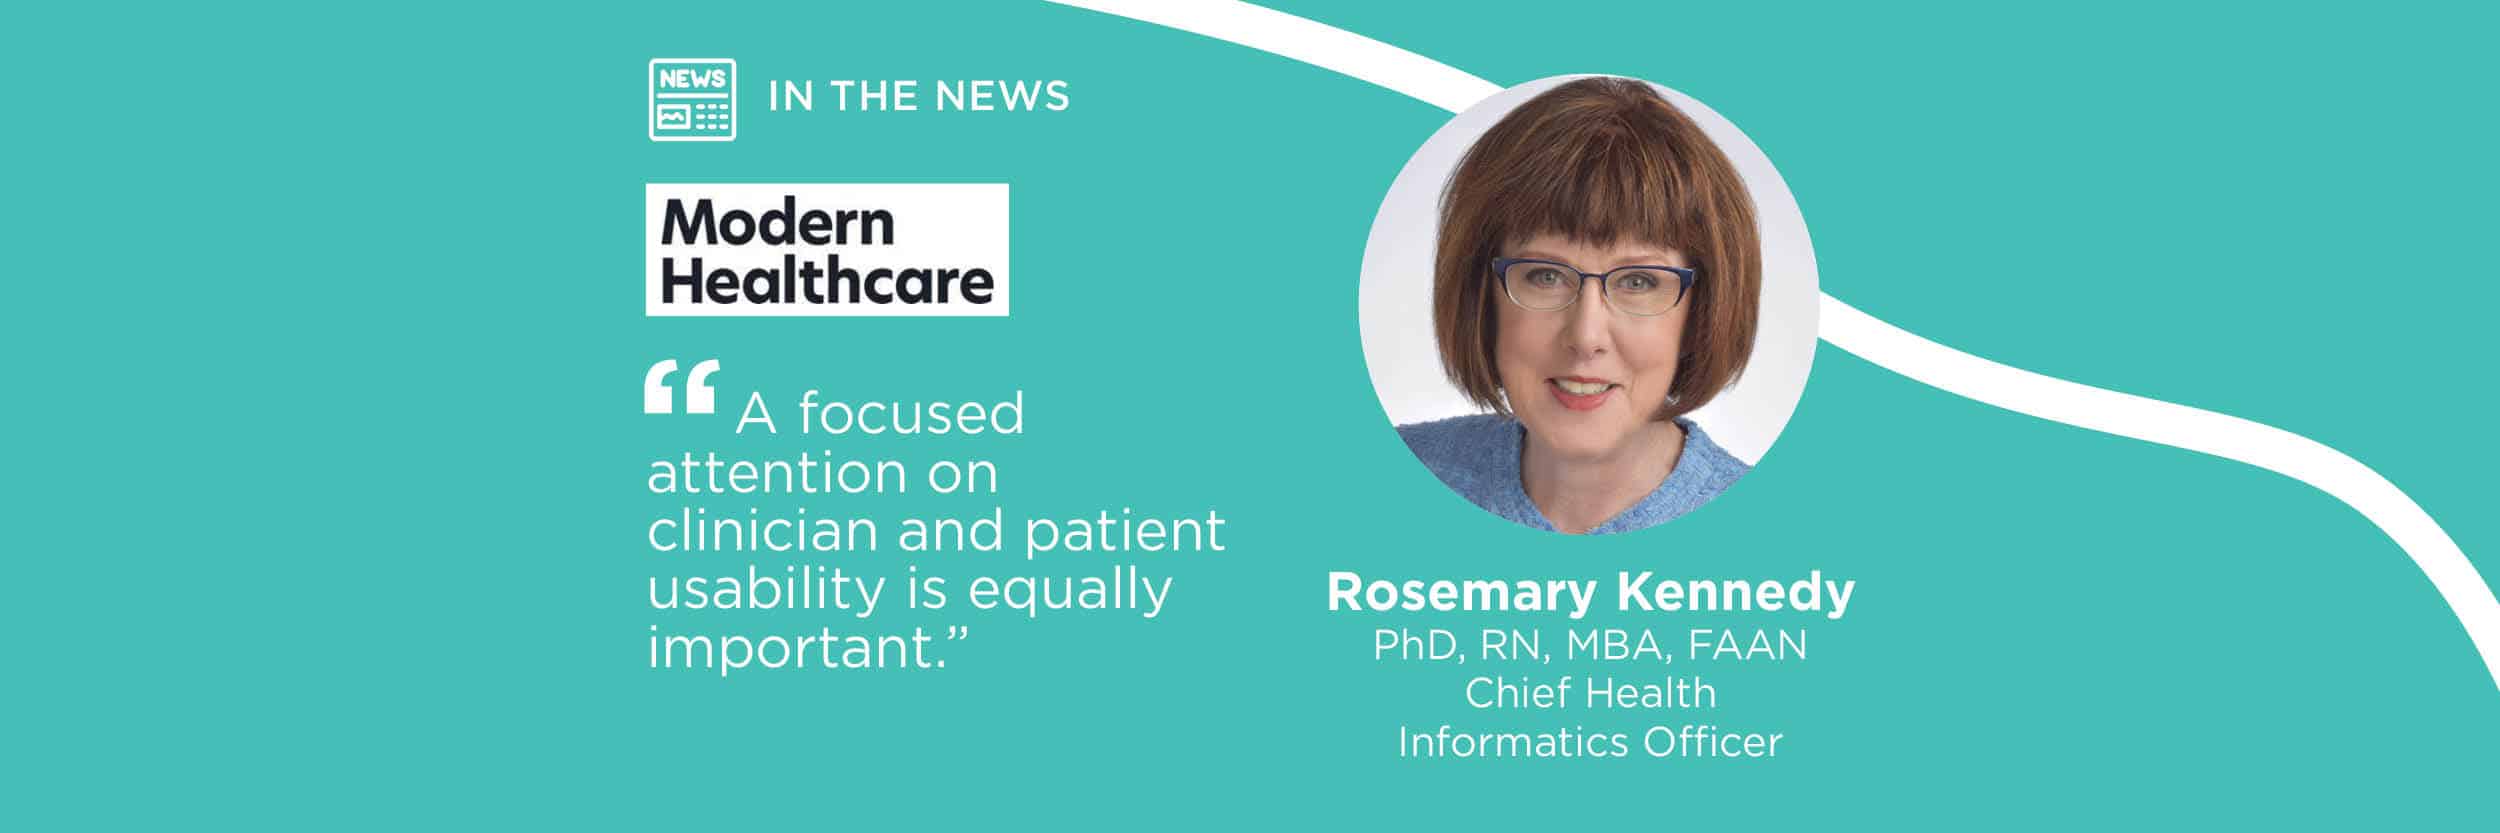 Chief Health Informatics Officer Rosemary Kennedy news graphic